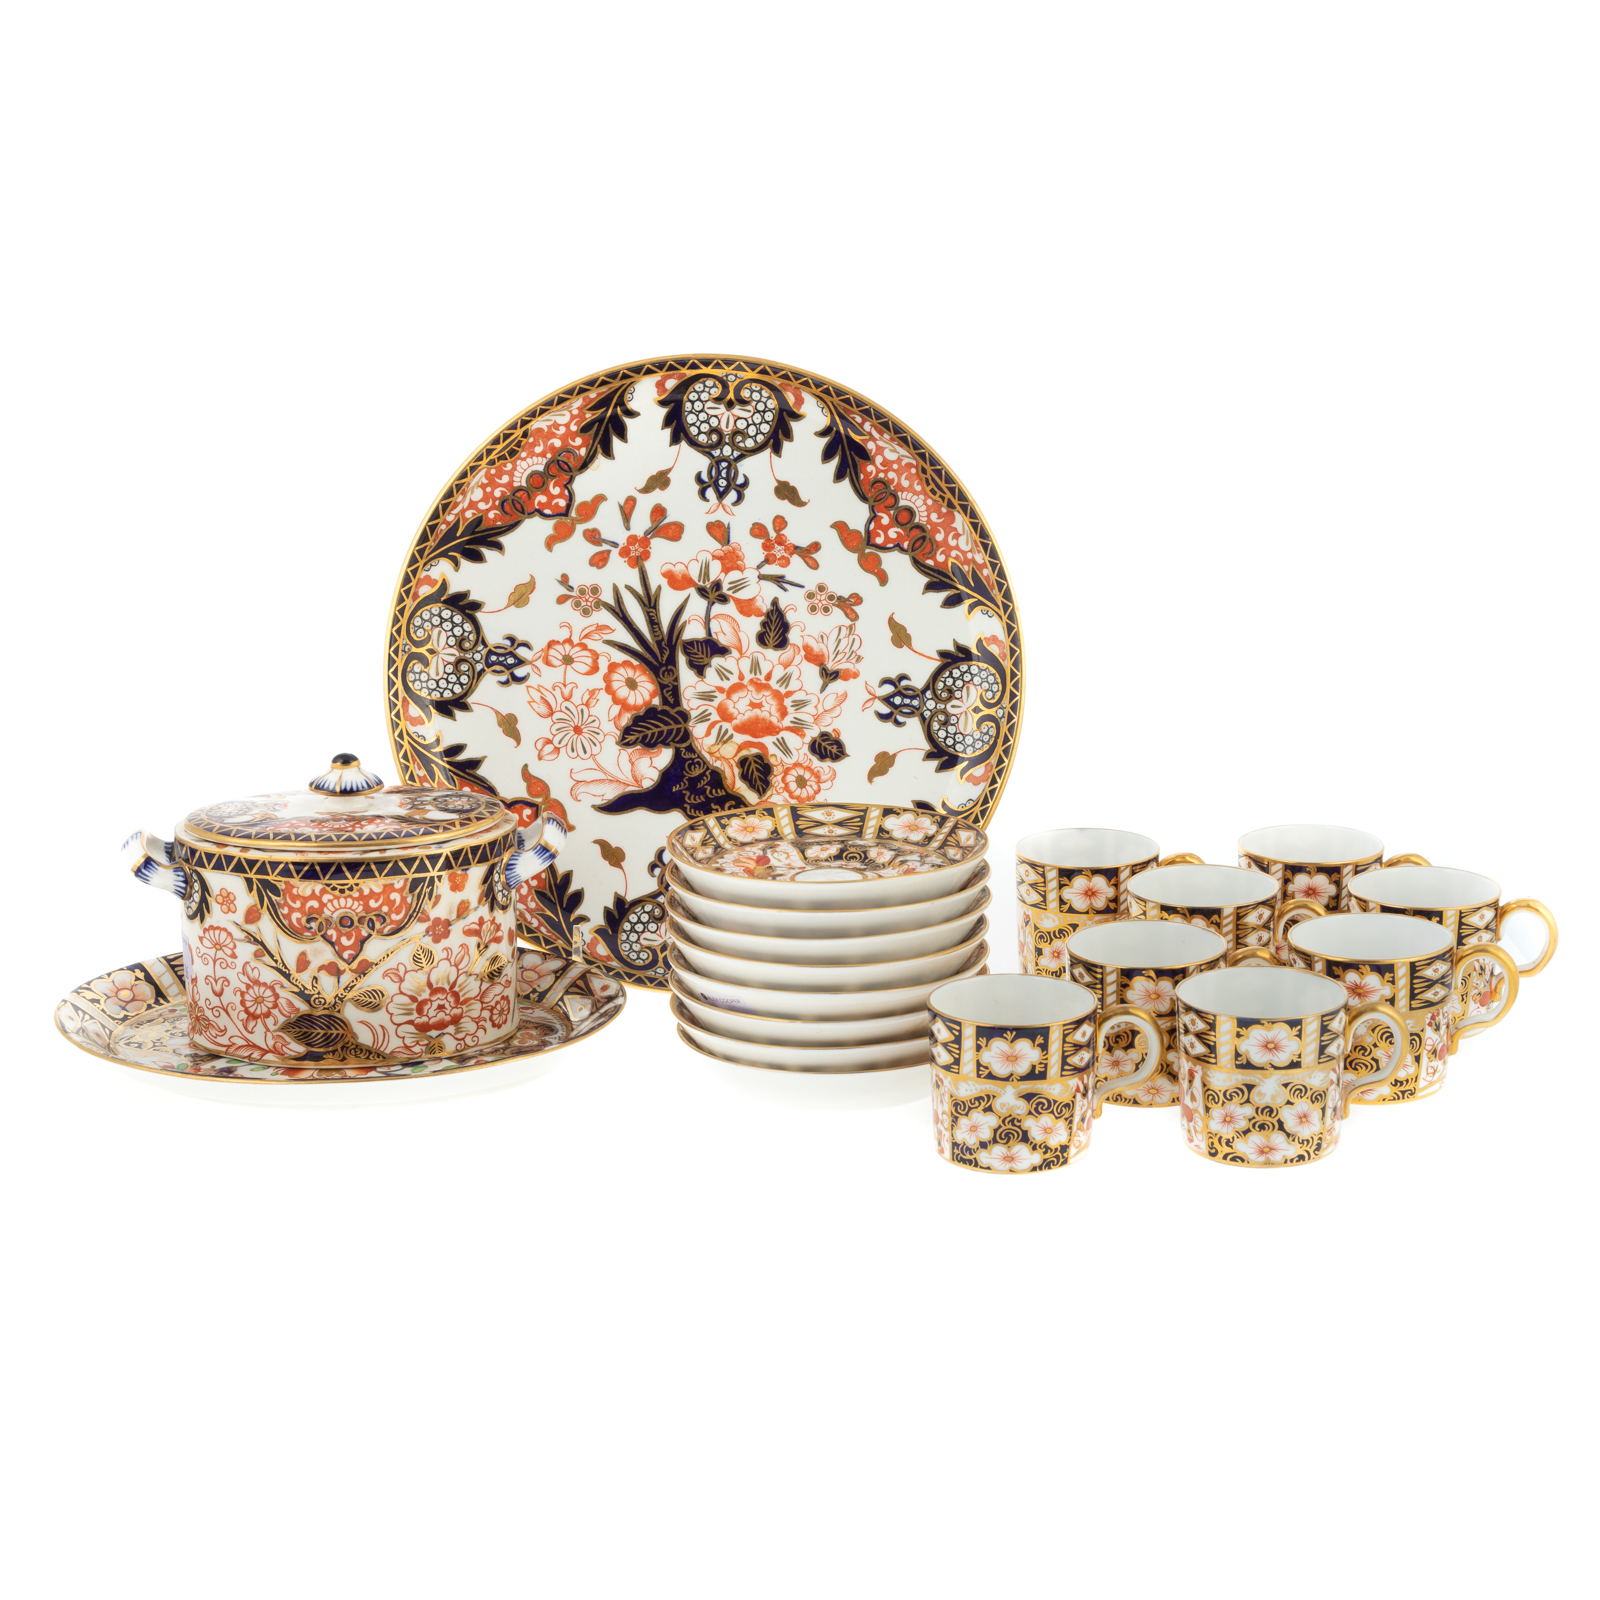 19 ROYAL CROWN DERBY TABLE ARTICLES